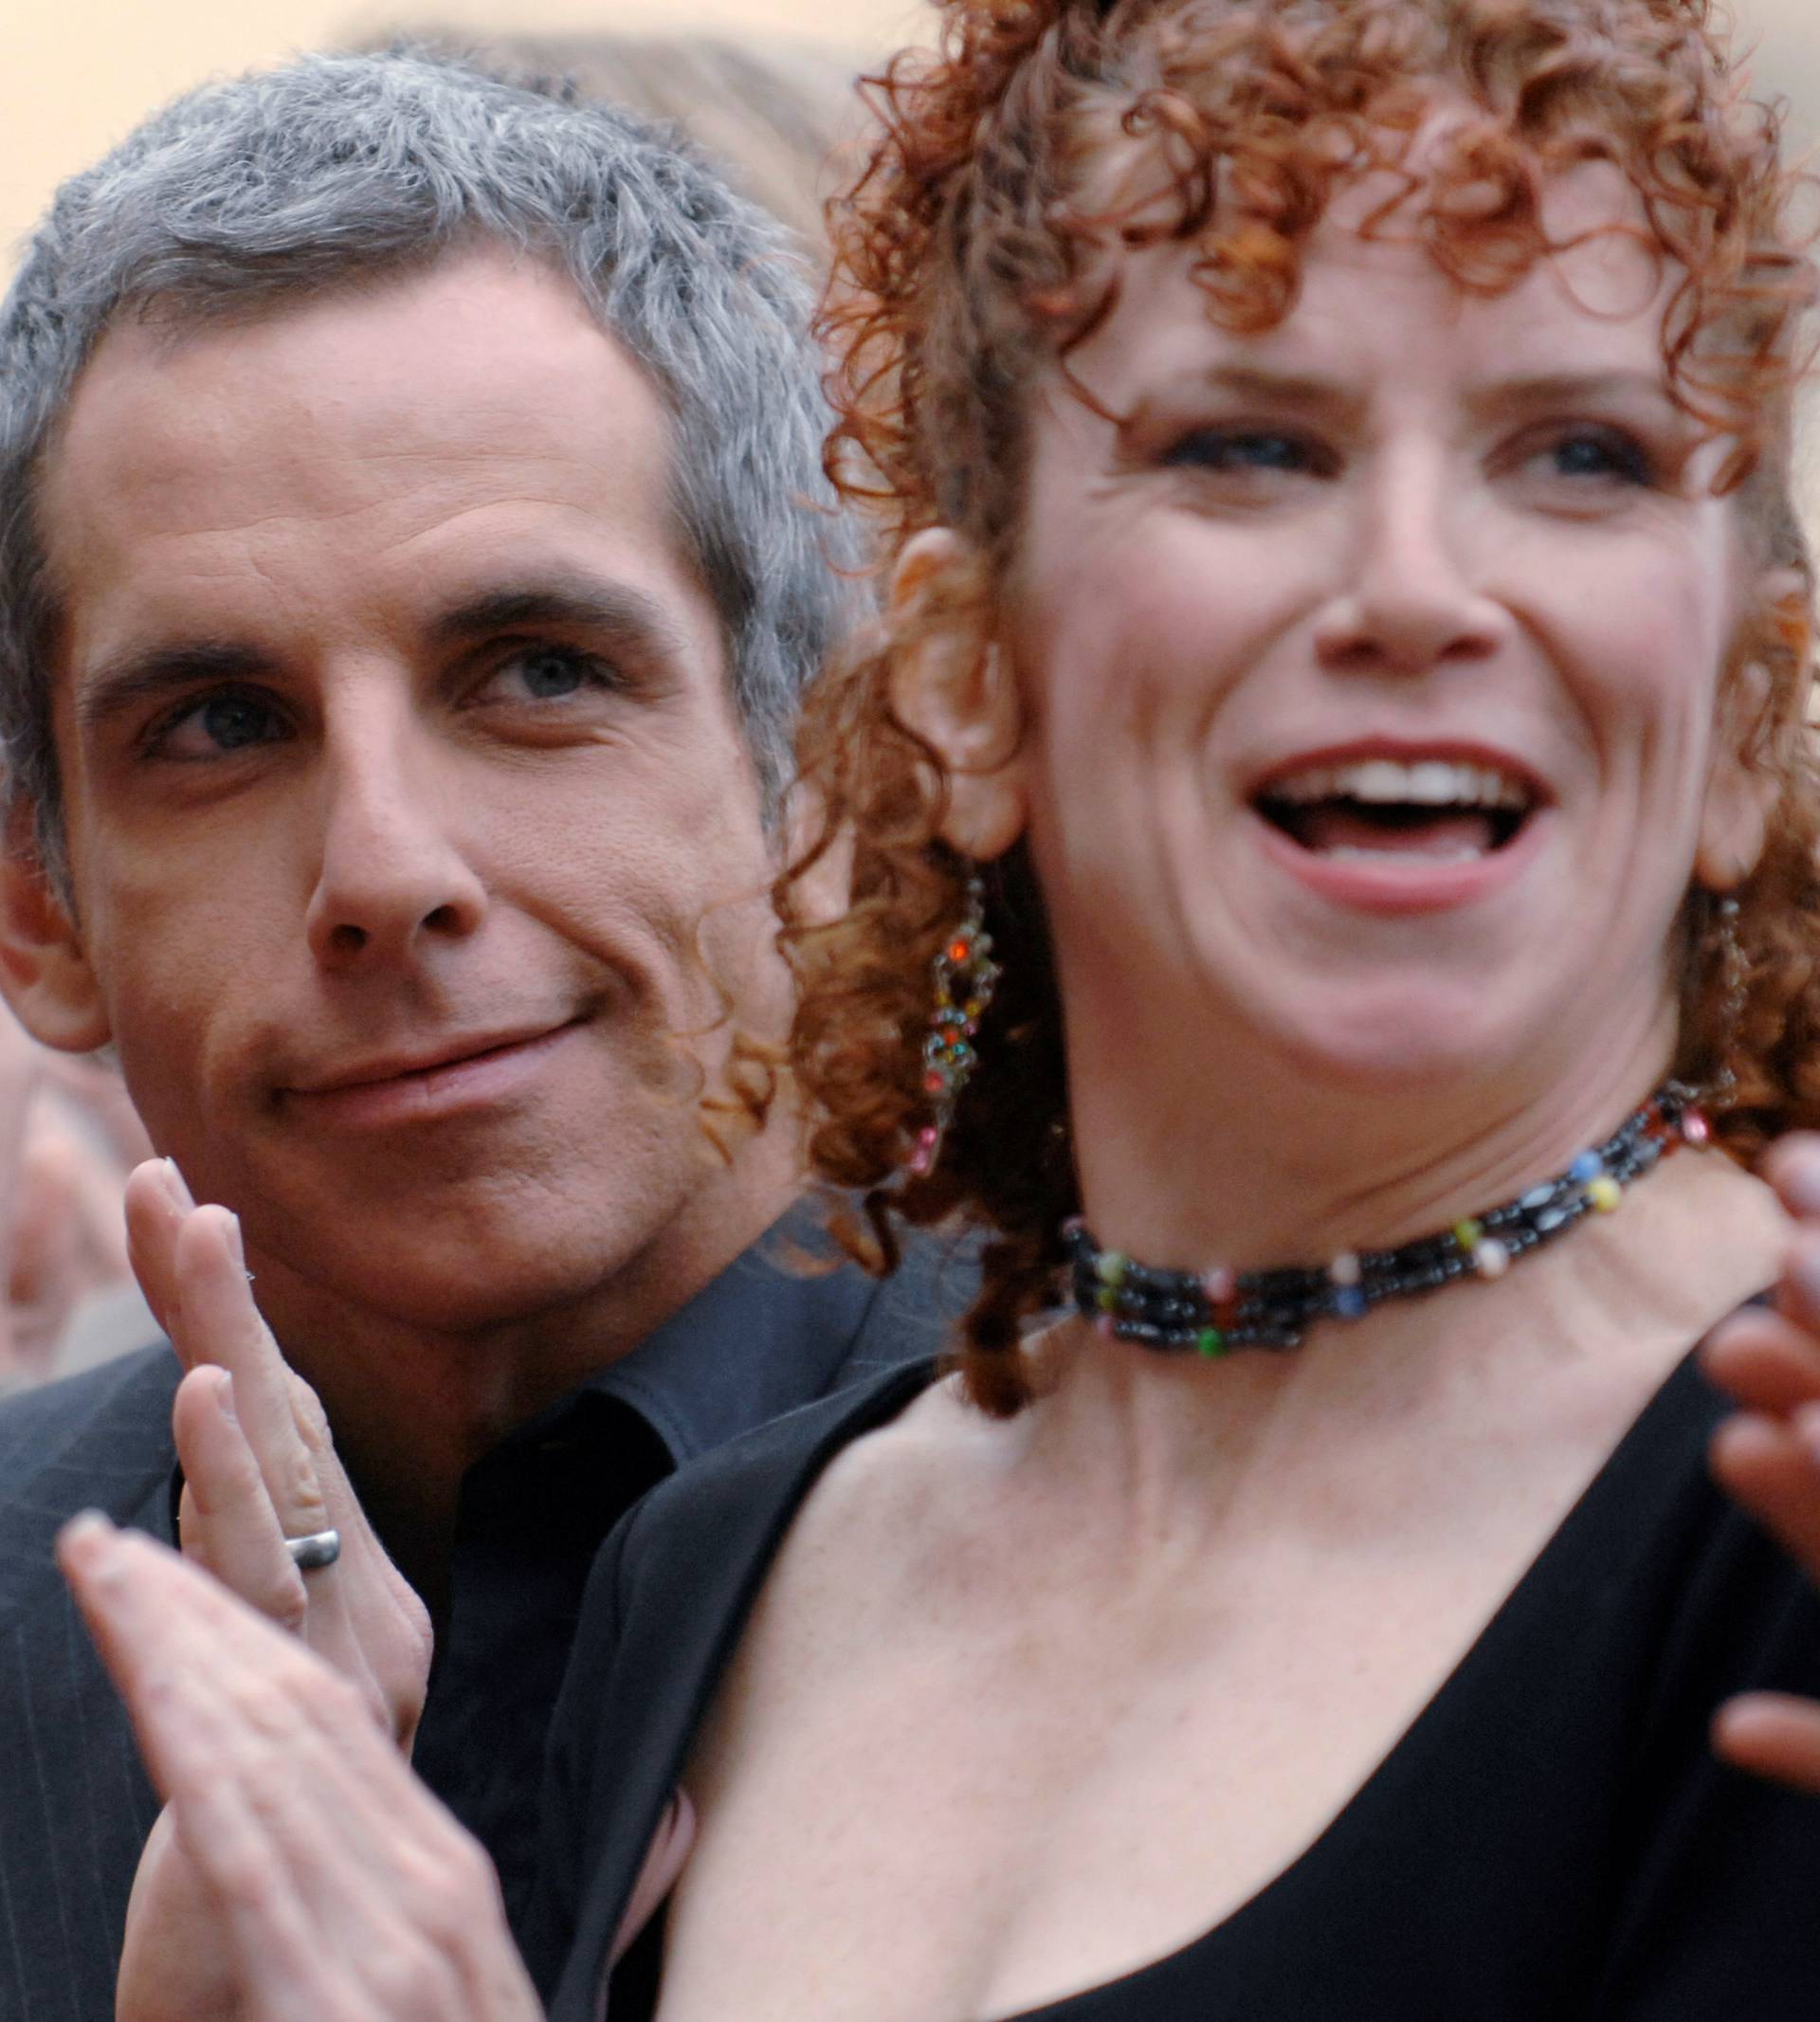 FILE PHOTO: Actor Ben Stiller and his sister Amy Stiller applaud at a ceremony in Los Angeles